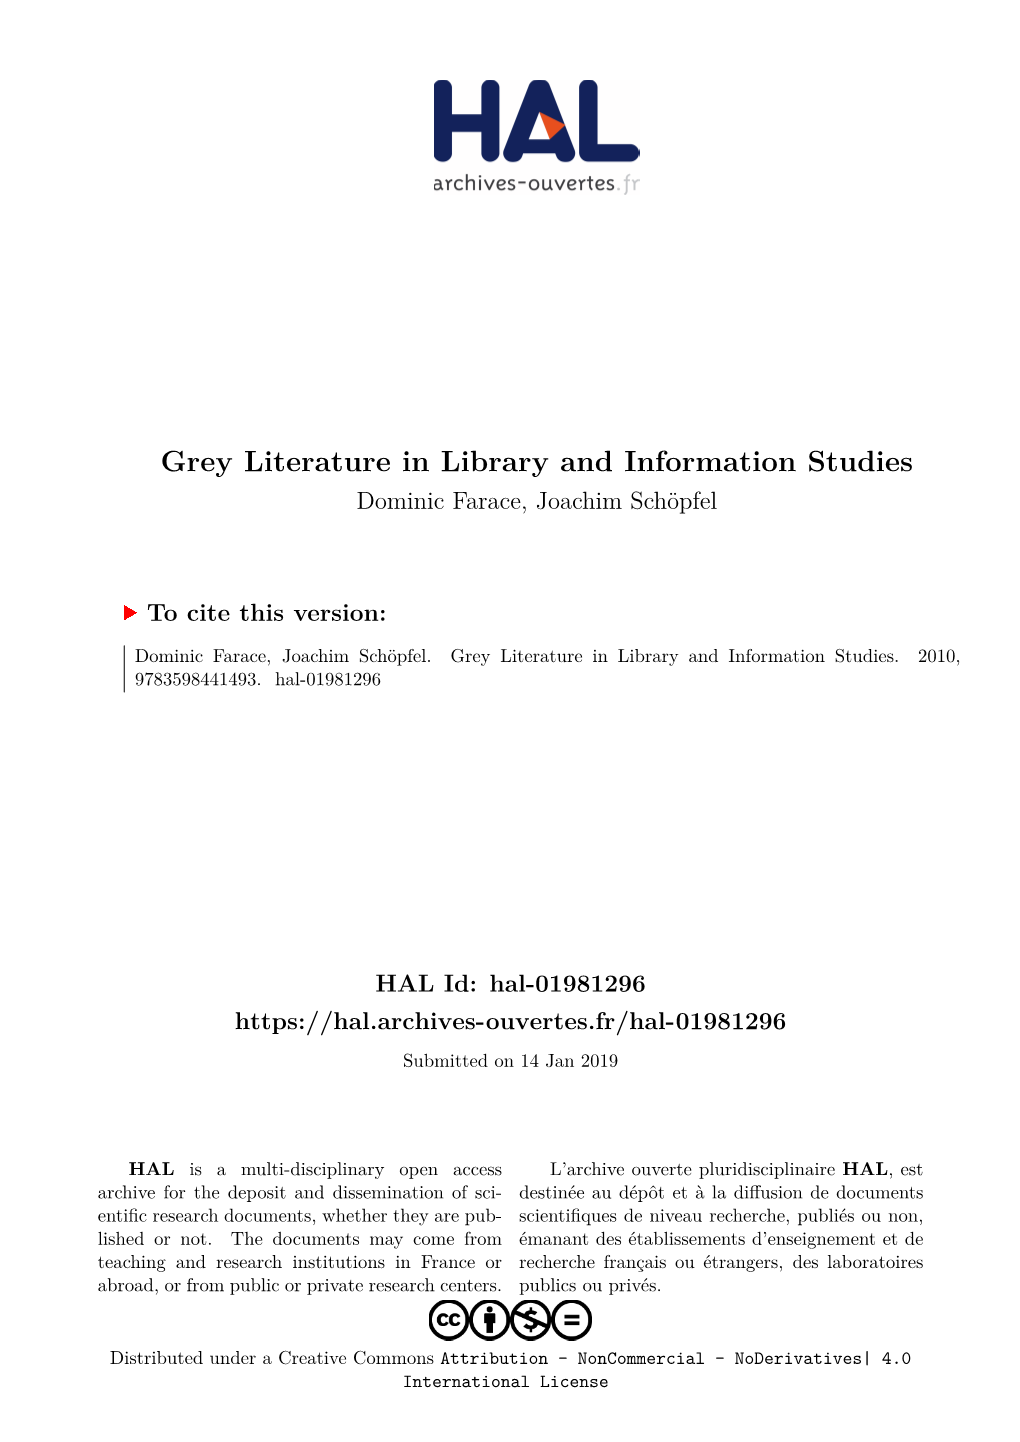 Grey Literature in Library and Information Studies Dominic Farace, Joachim Schöpfel